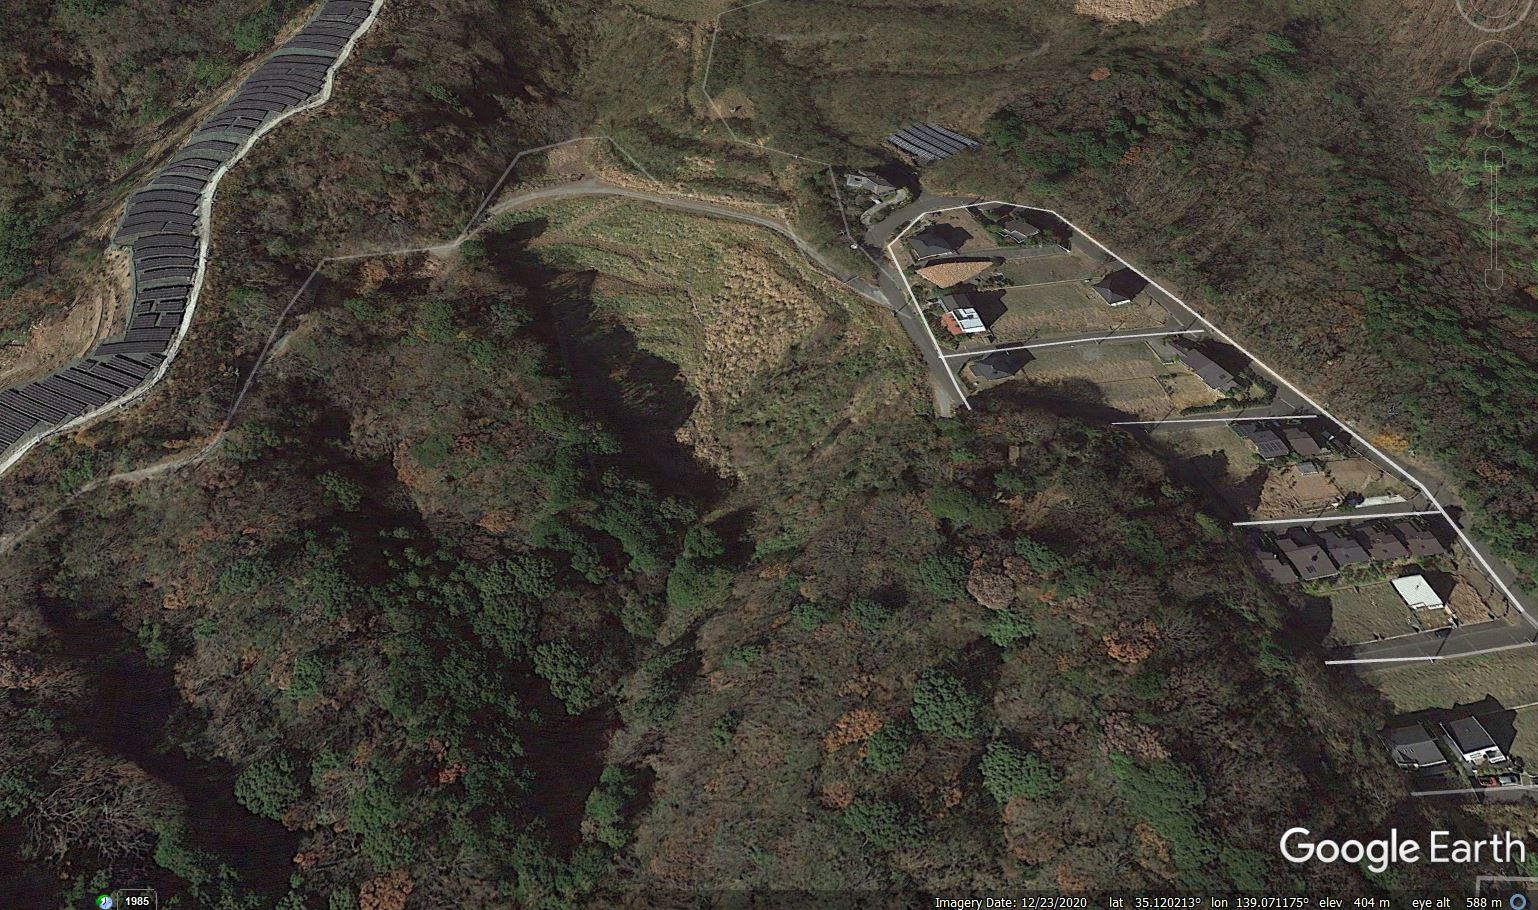 Google Earth image of the source zone of the Atami landslide in Japan.